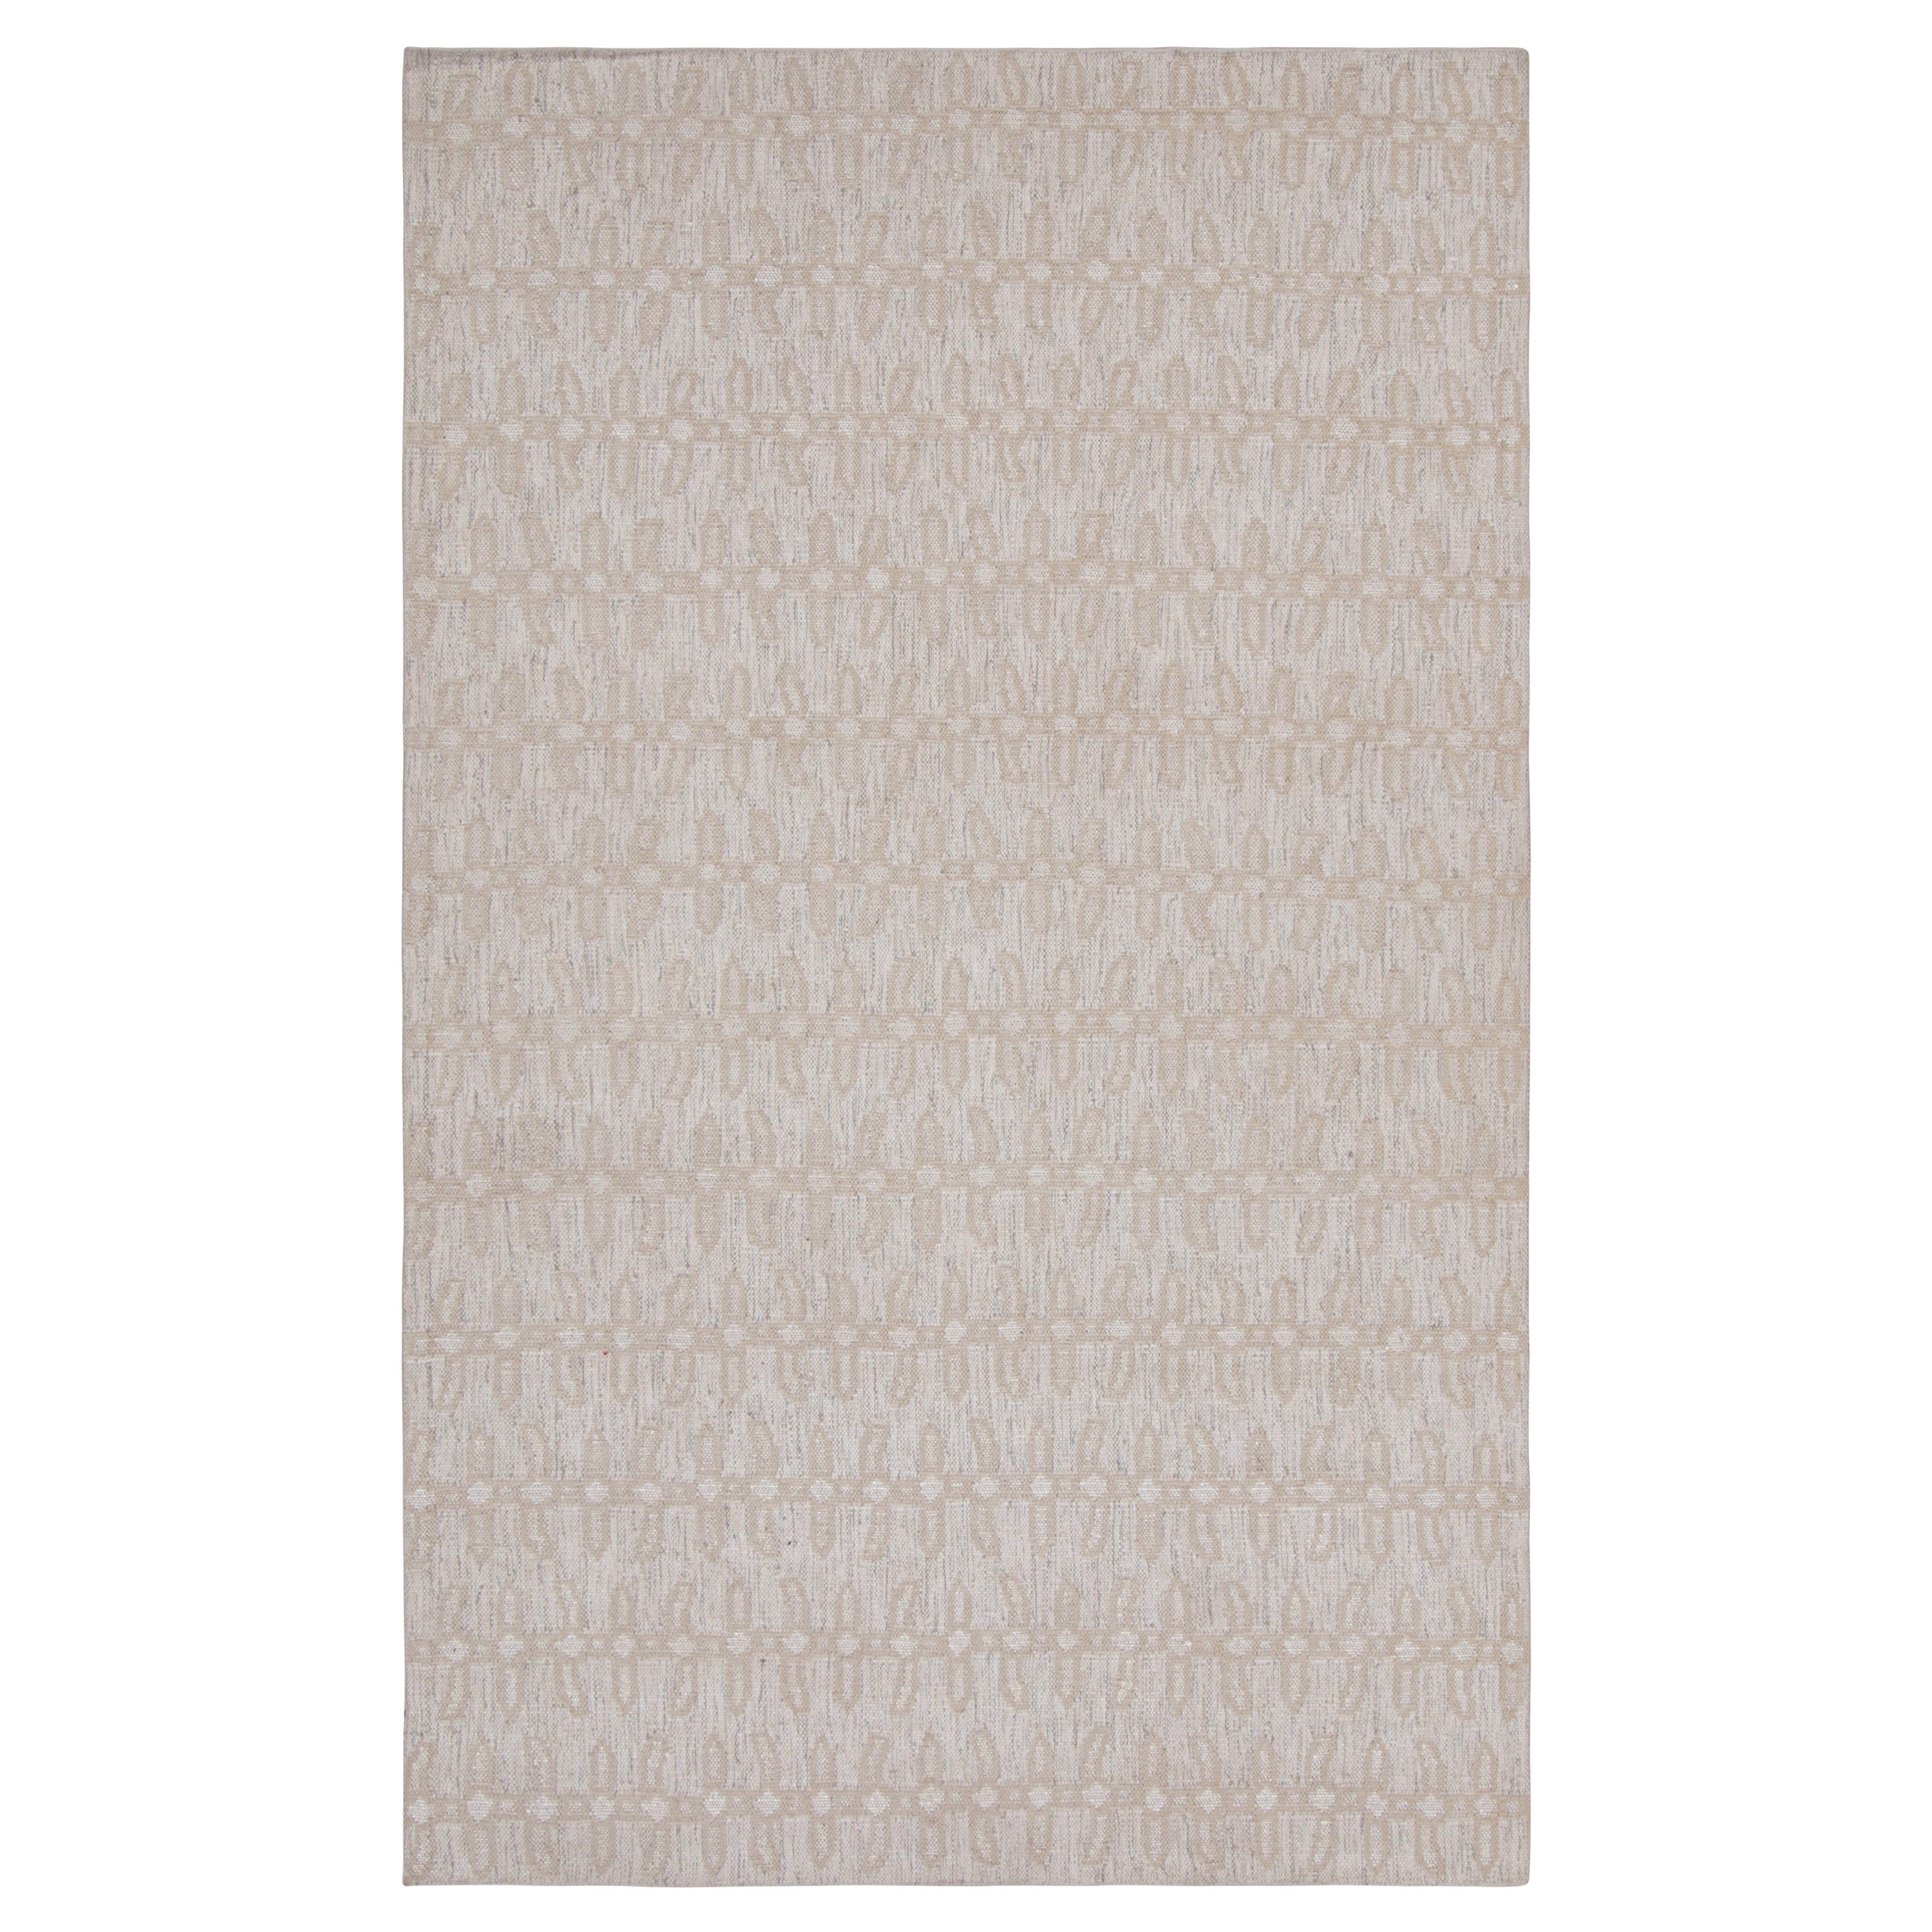 Rug & Kilim’s Scandinavian Style Rug in White with Floral Patterns